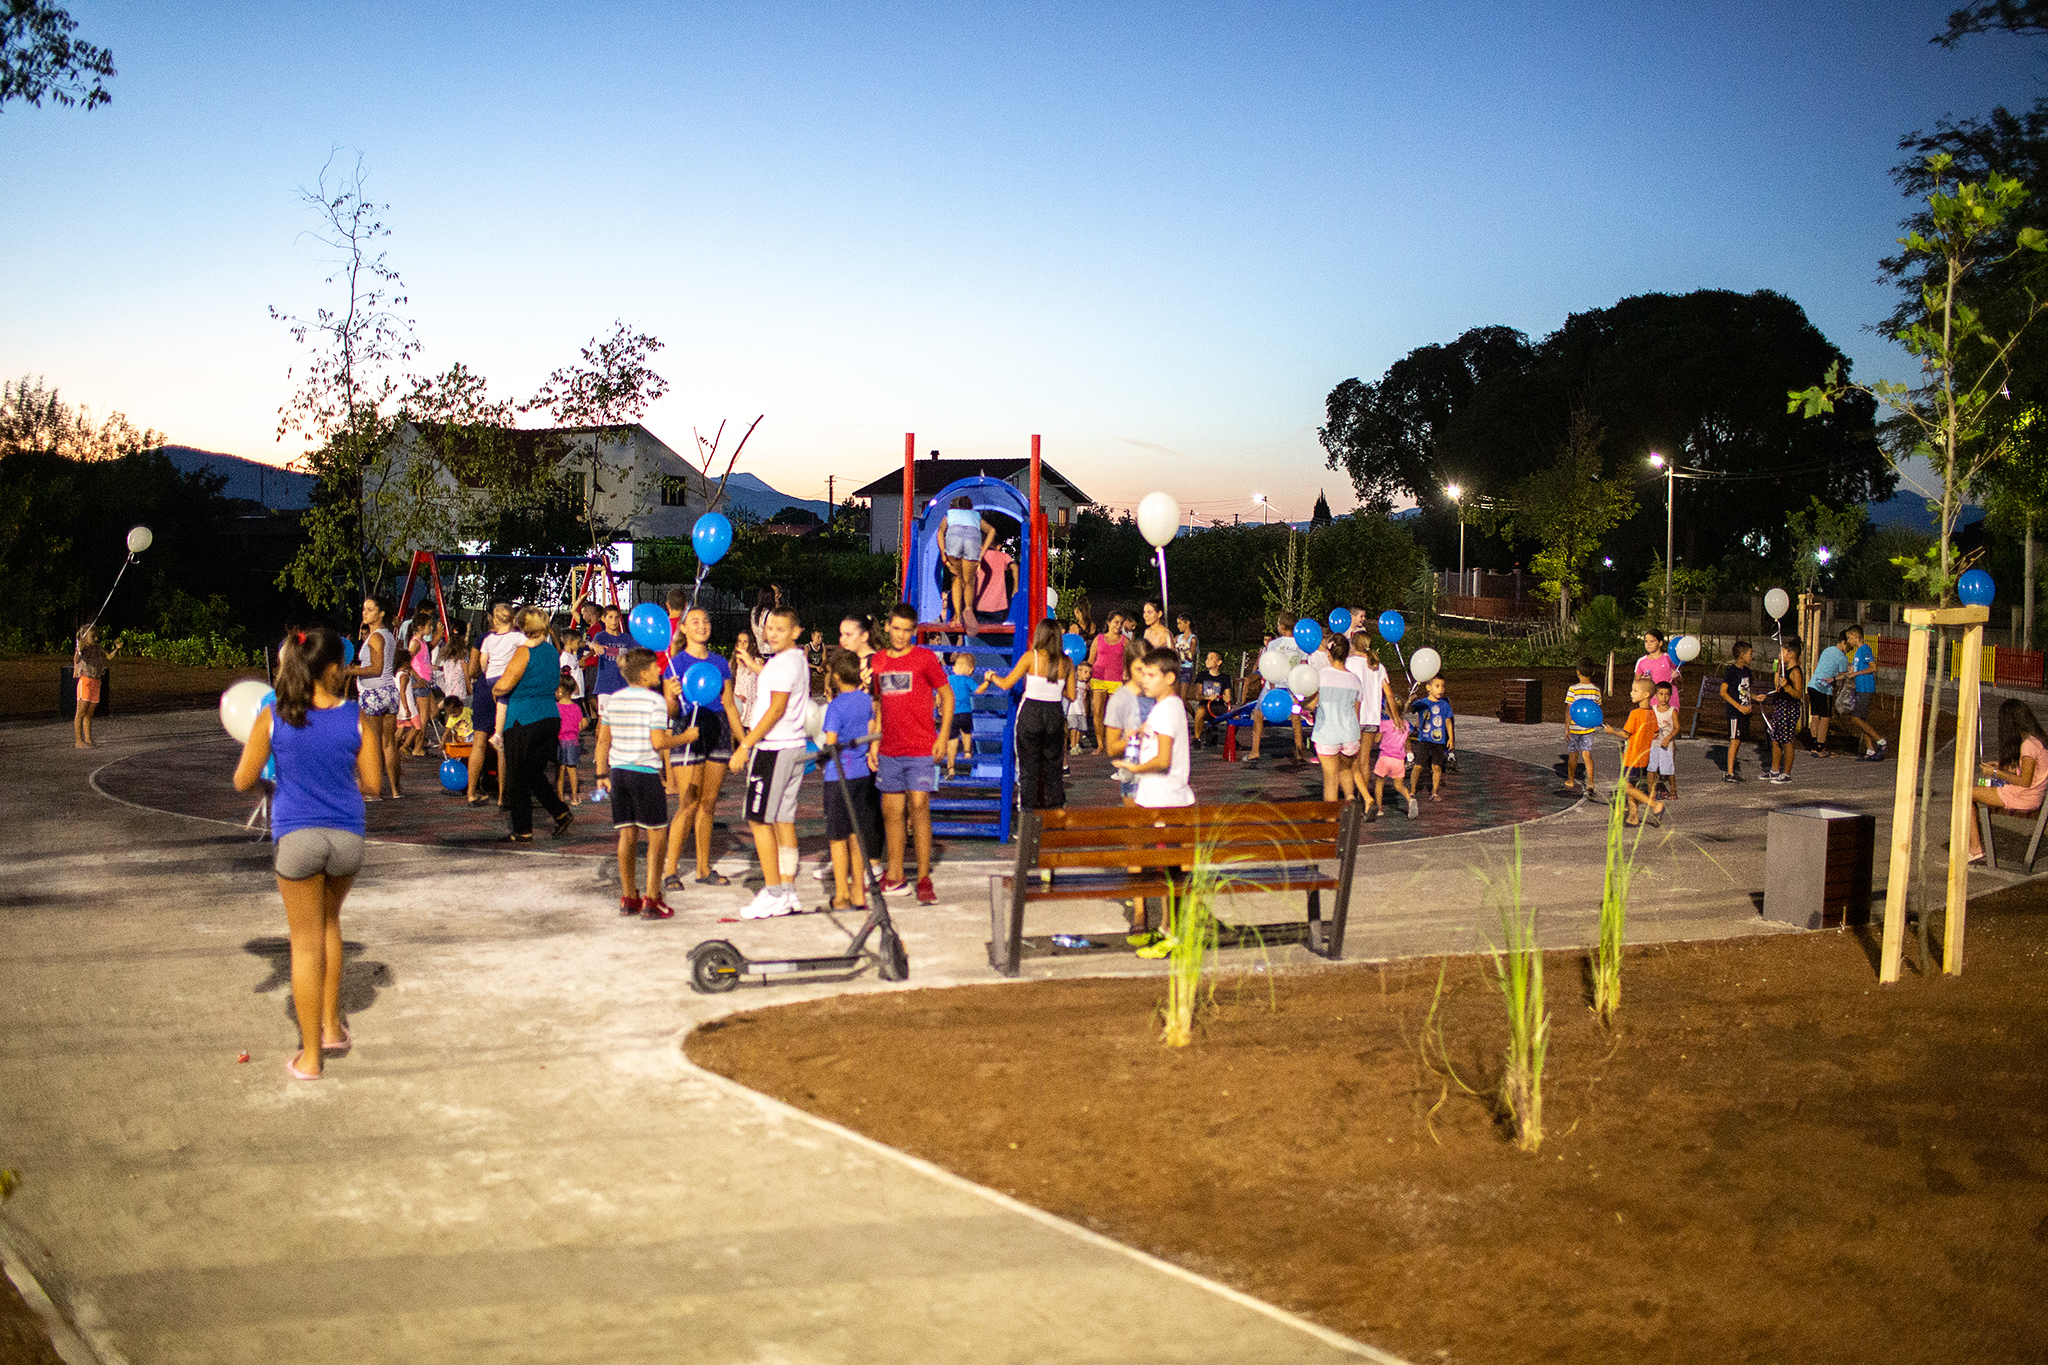 A New children's playground opened in Golubovci